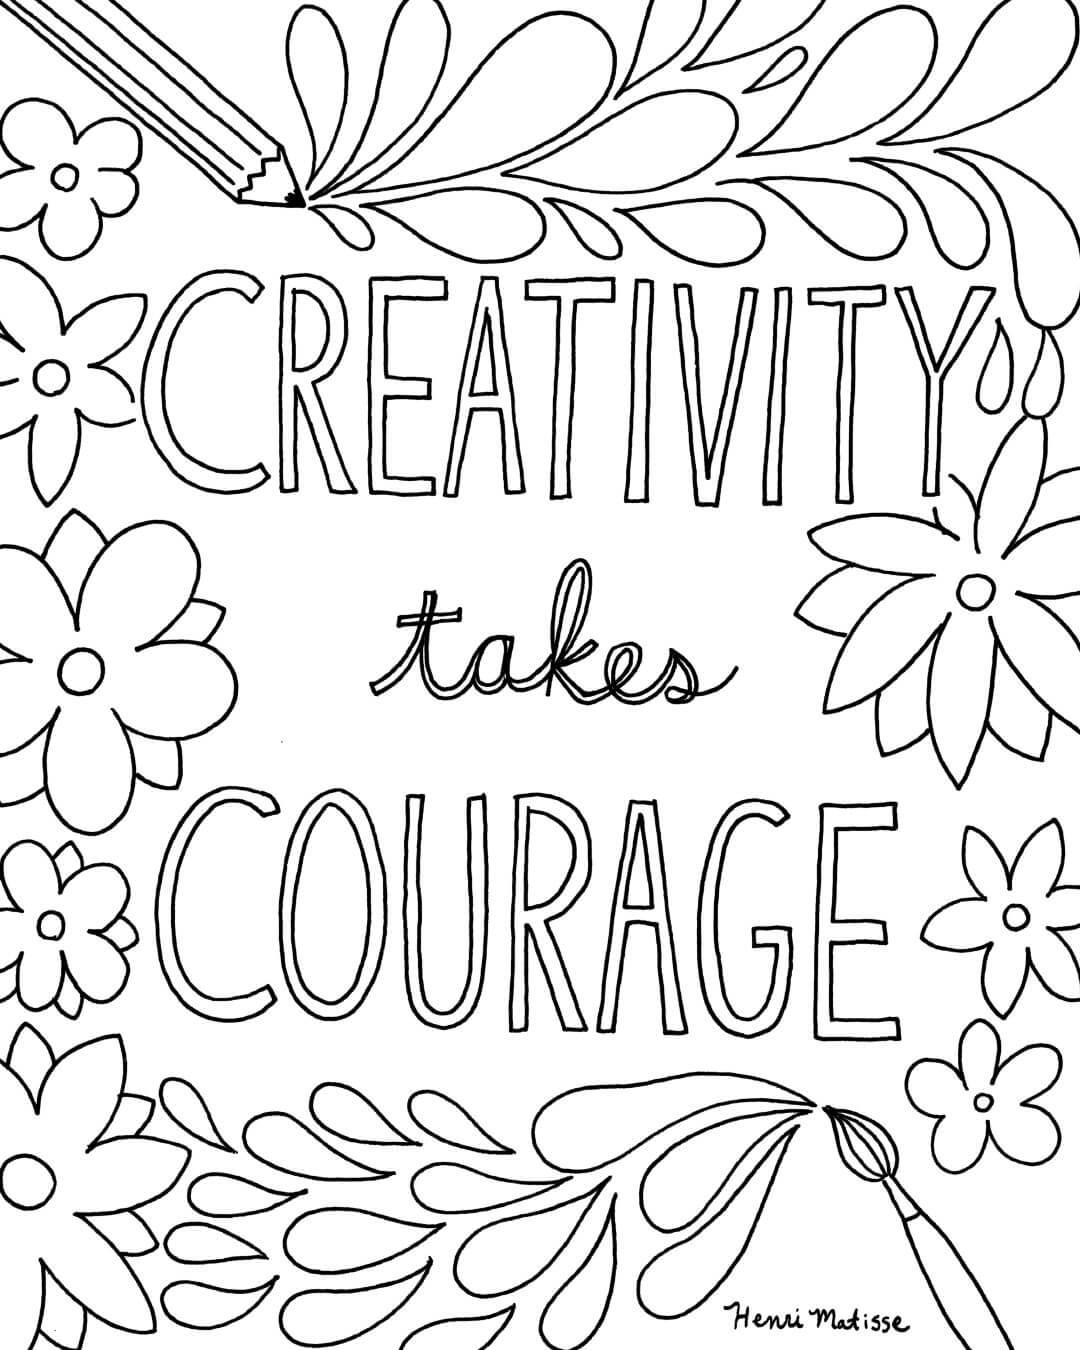 Matisse Quote Coloring Page